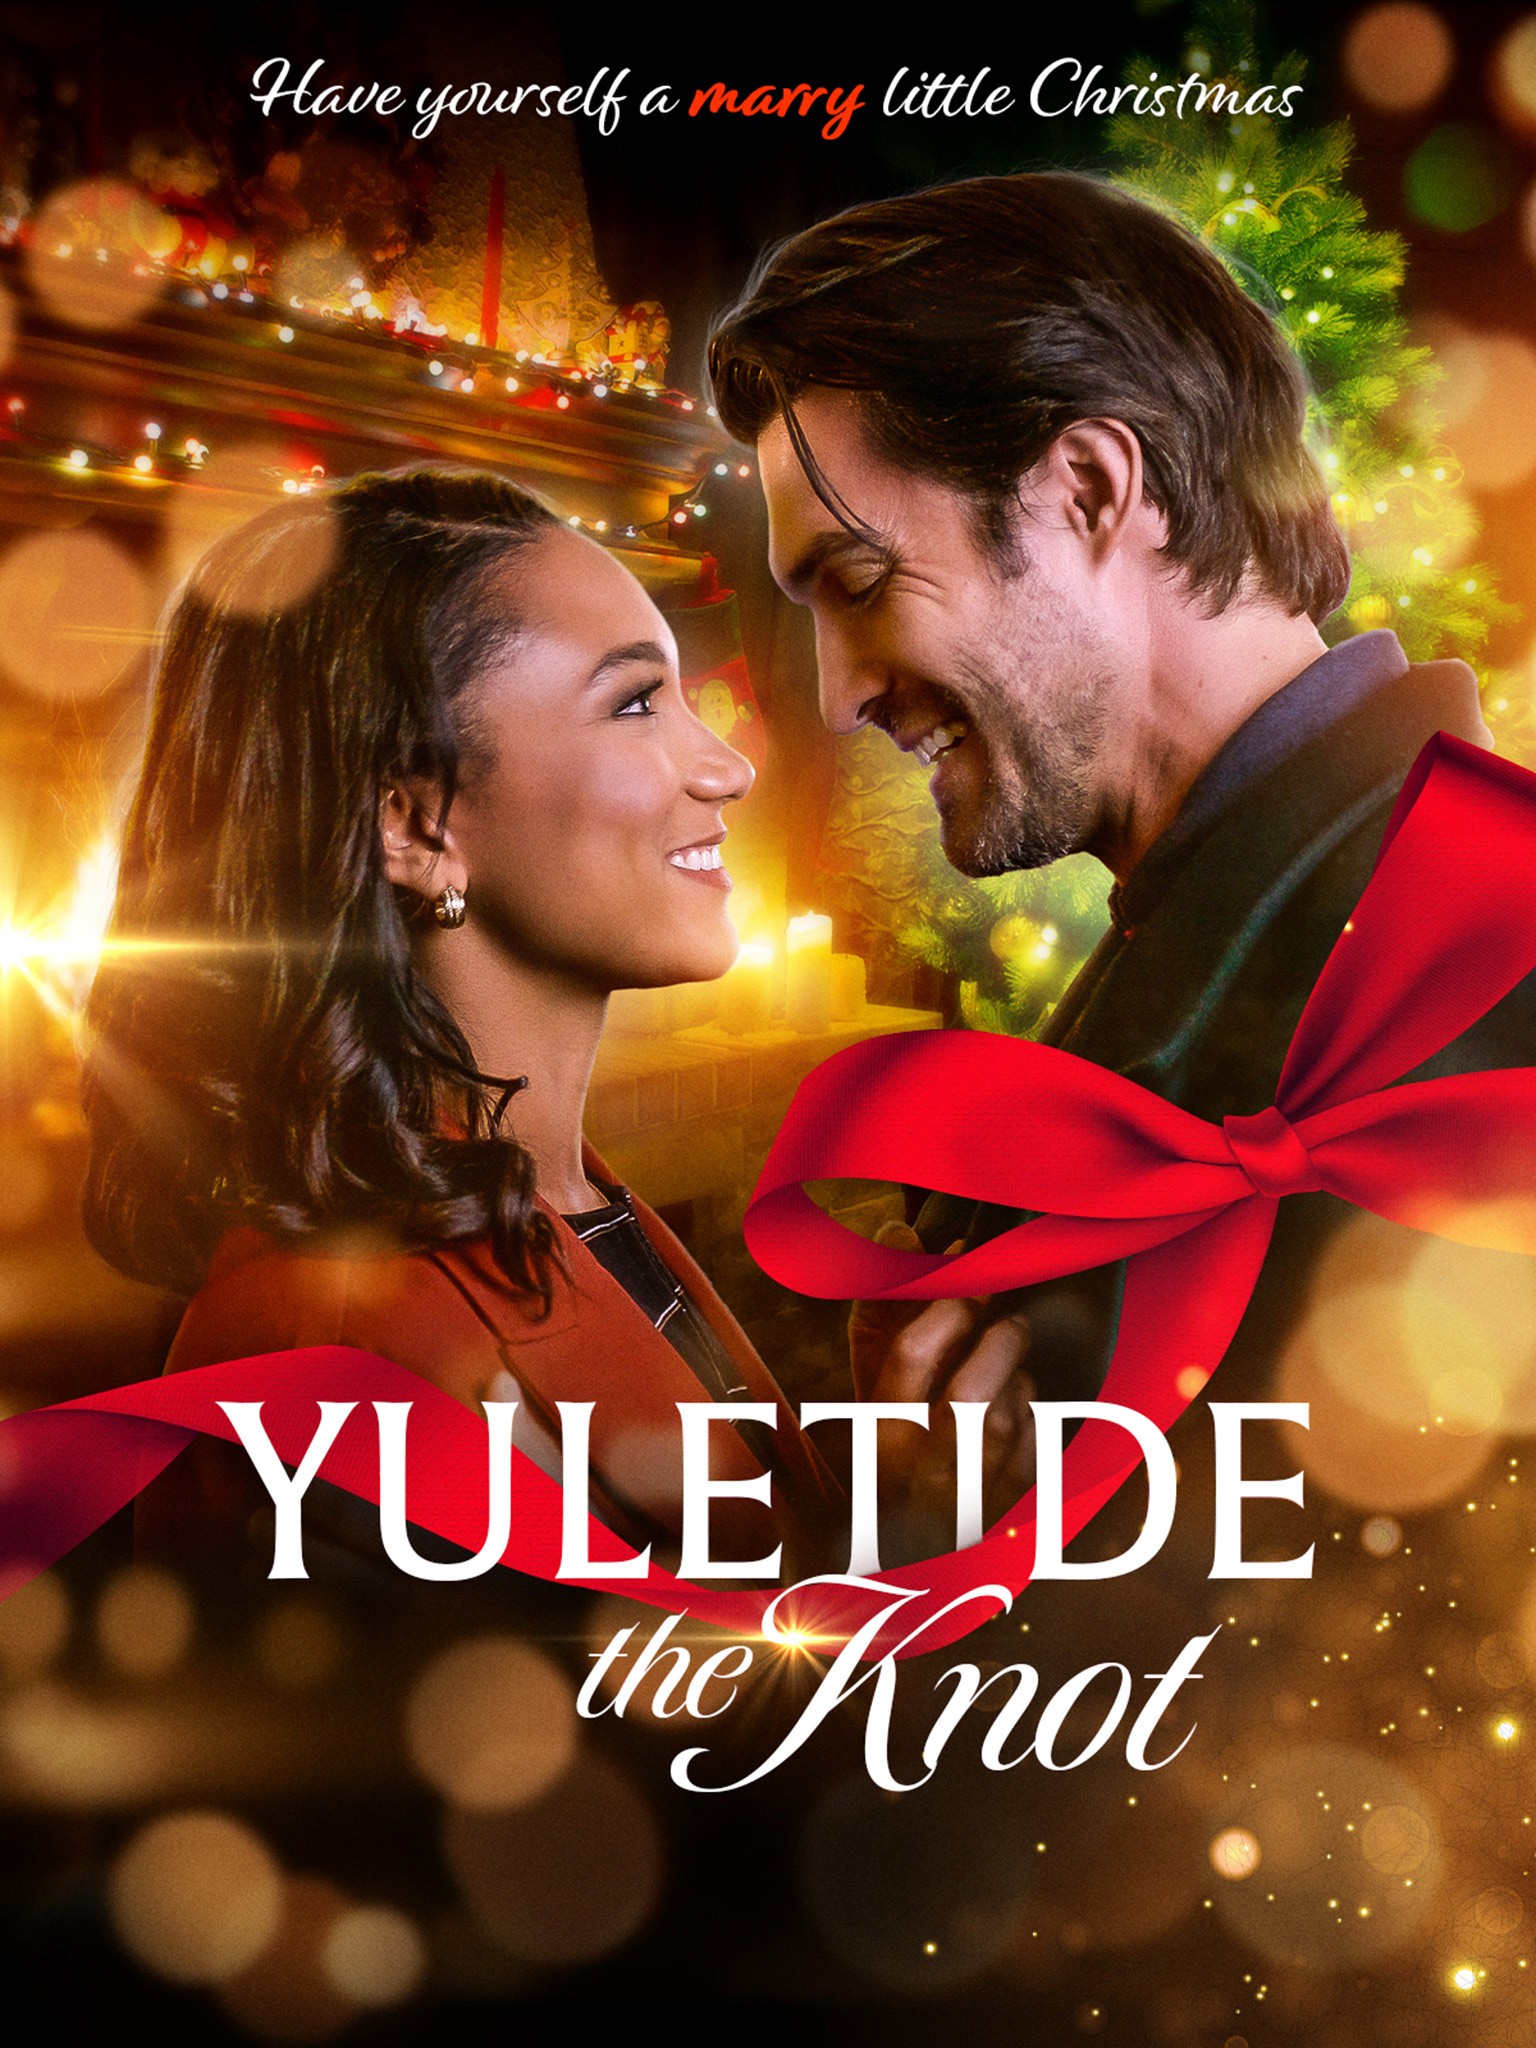 Yuletide the Knot Rotten Tomatoes